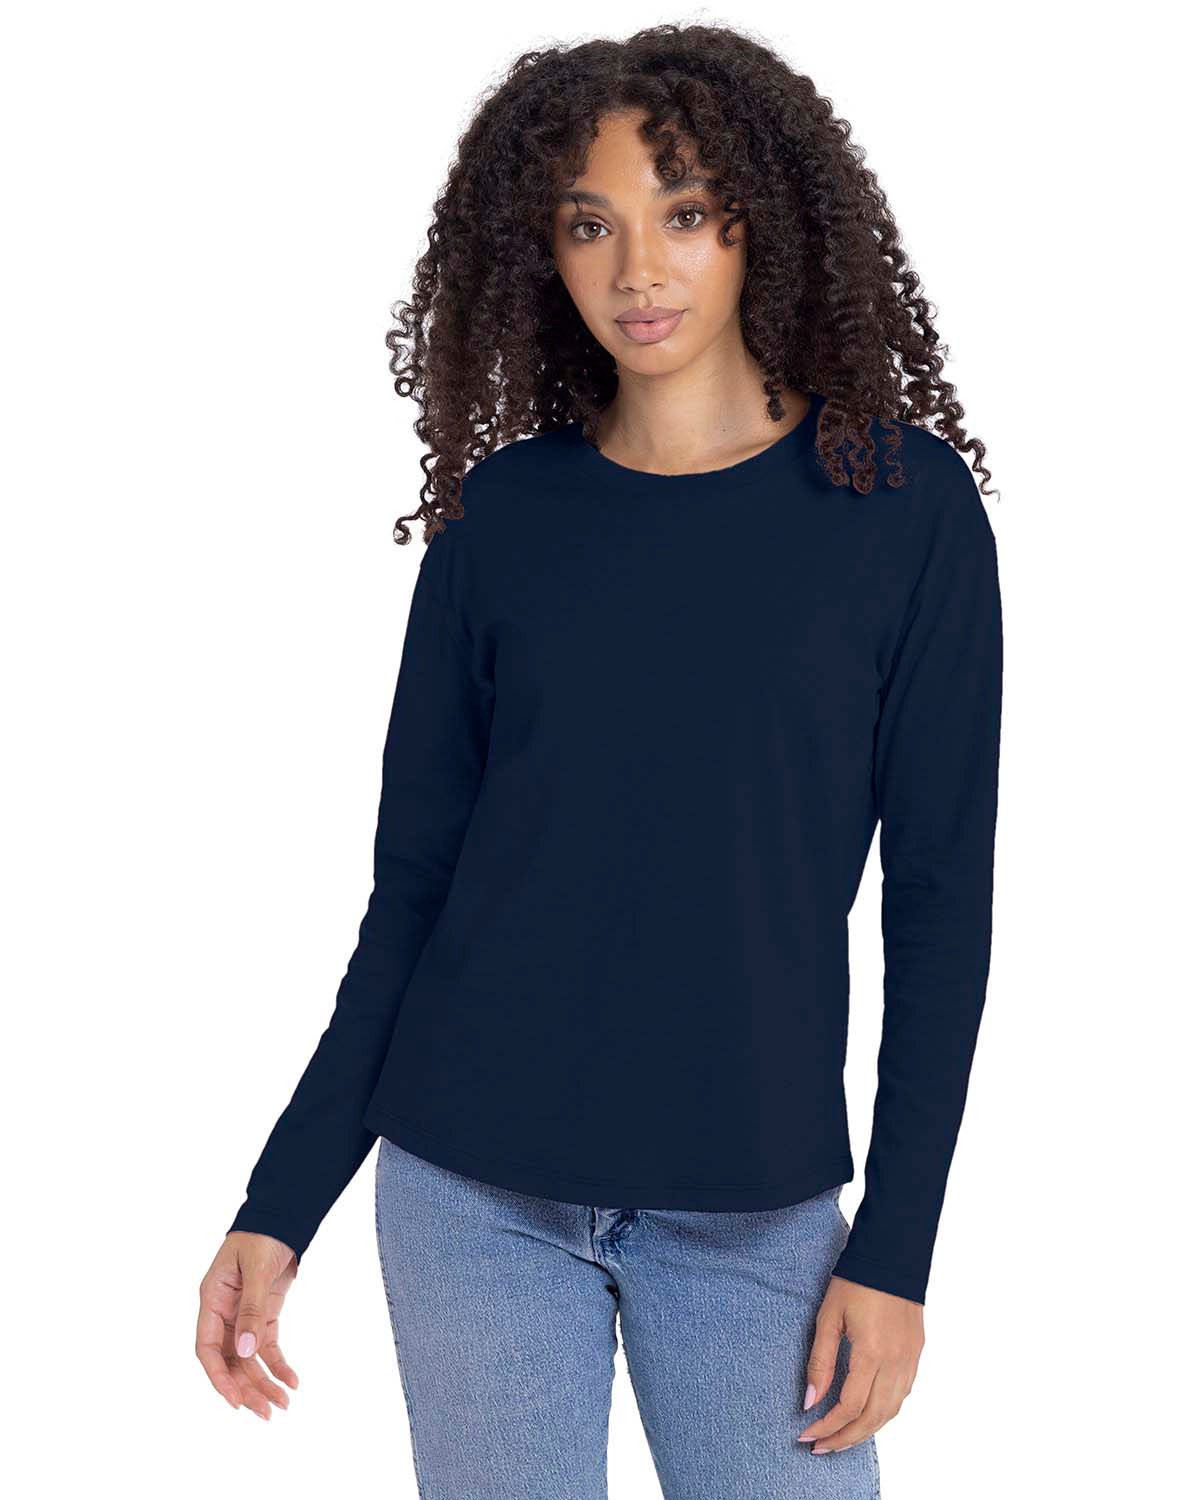 Women's Long Sleeve Shirts, Explore our New Arrivals